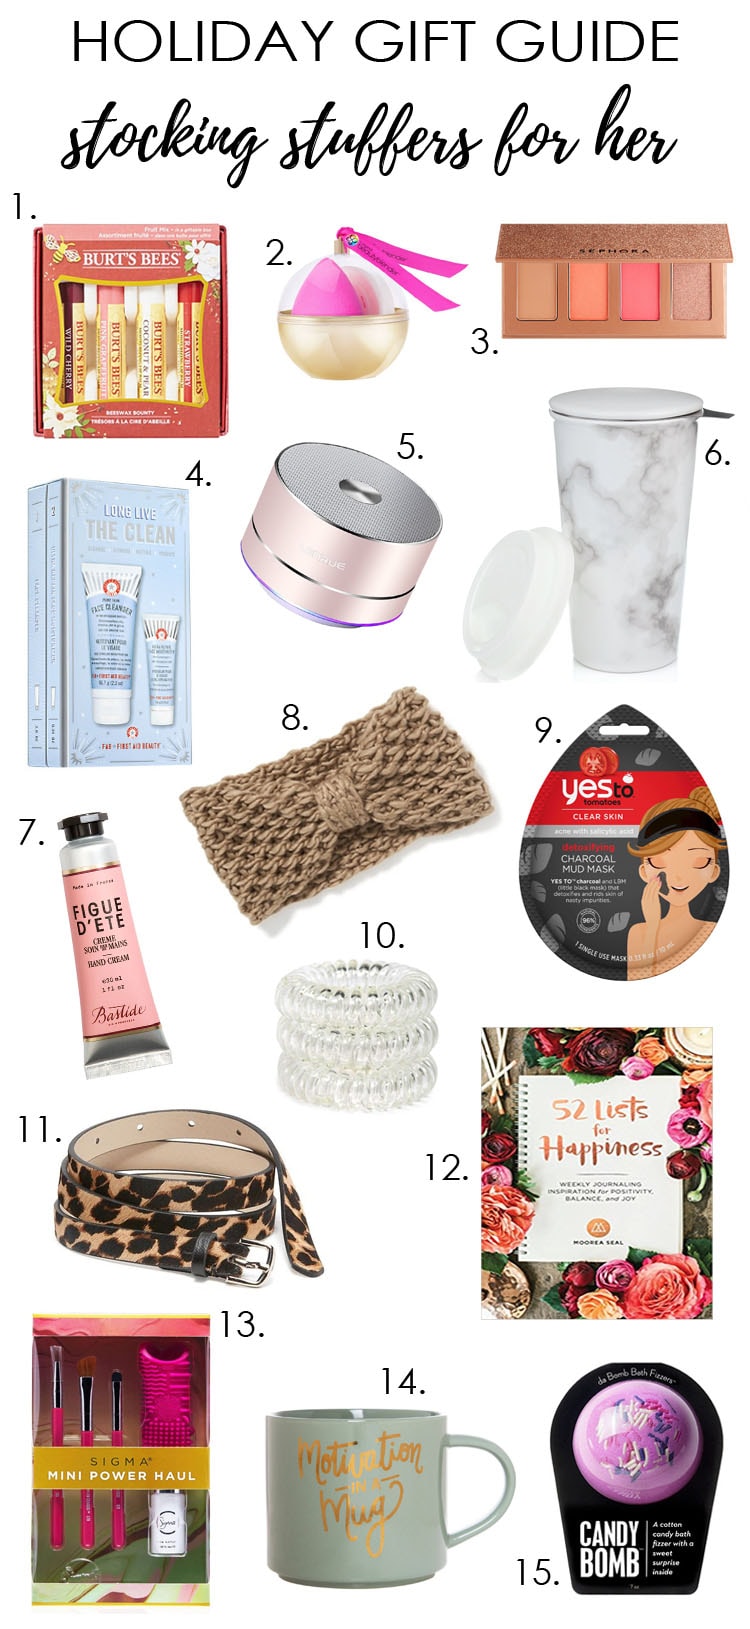 Holiday Gift Ideas: Stocking Stuffers for Her, Him and Kids